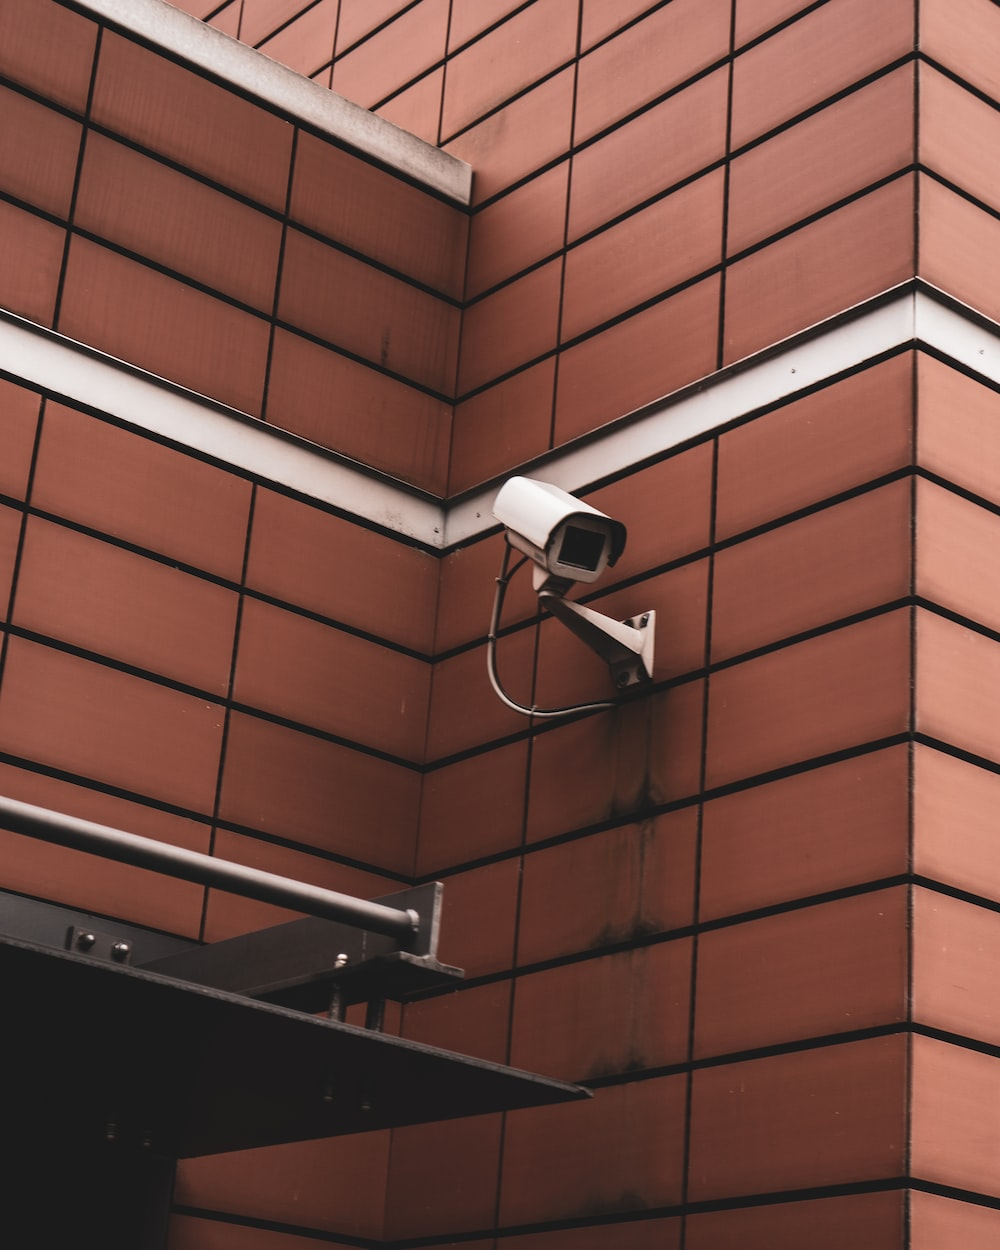 A Security Camera Installed at the Corner of a Building